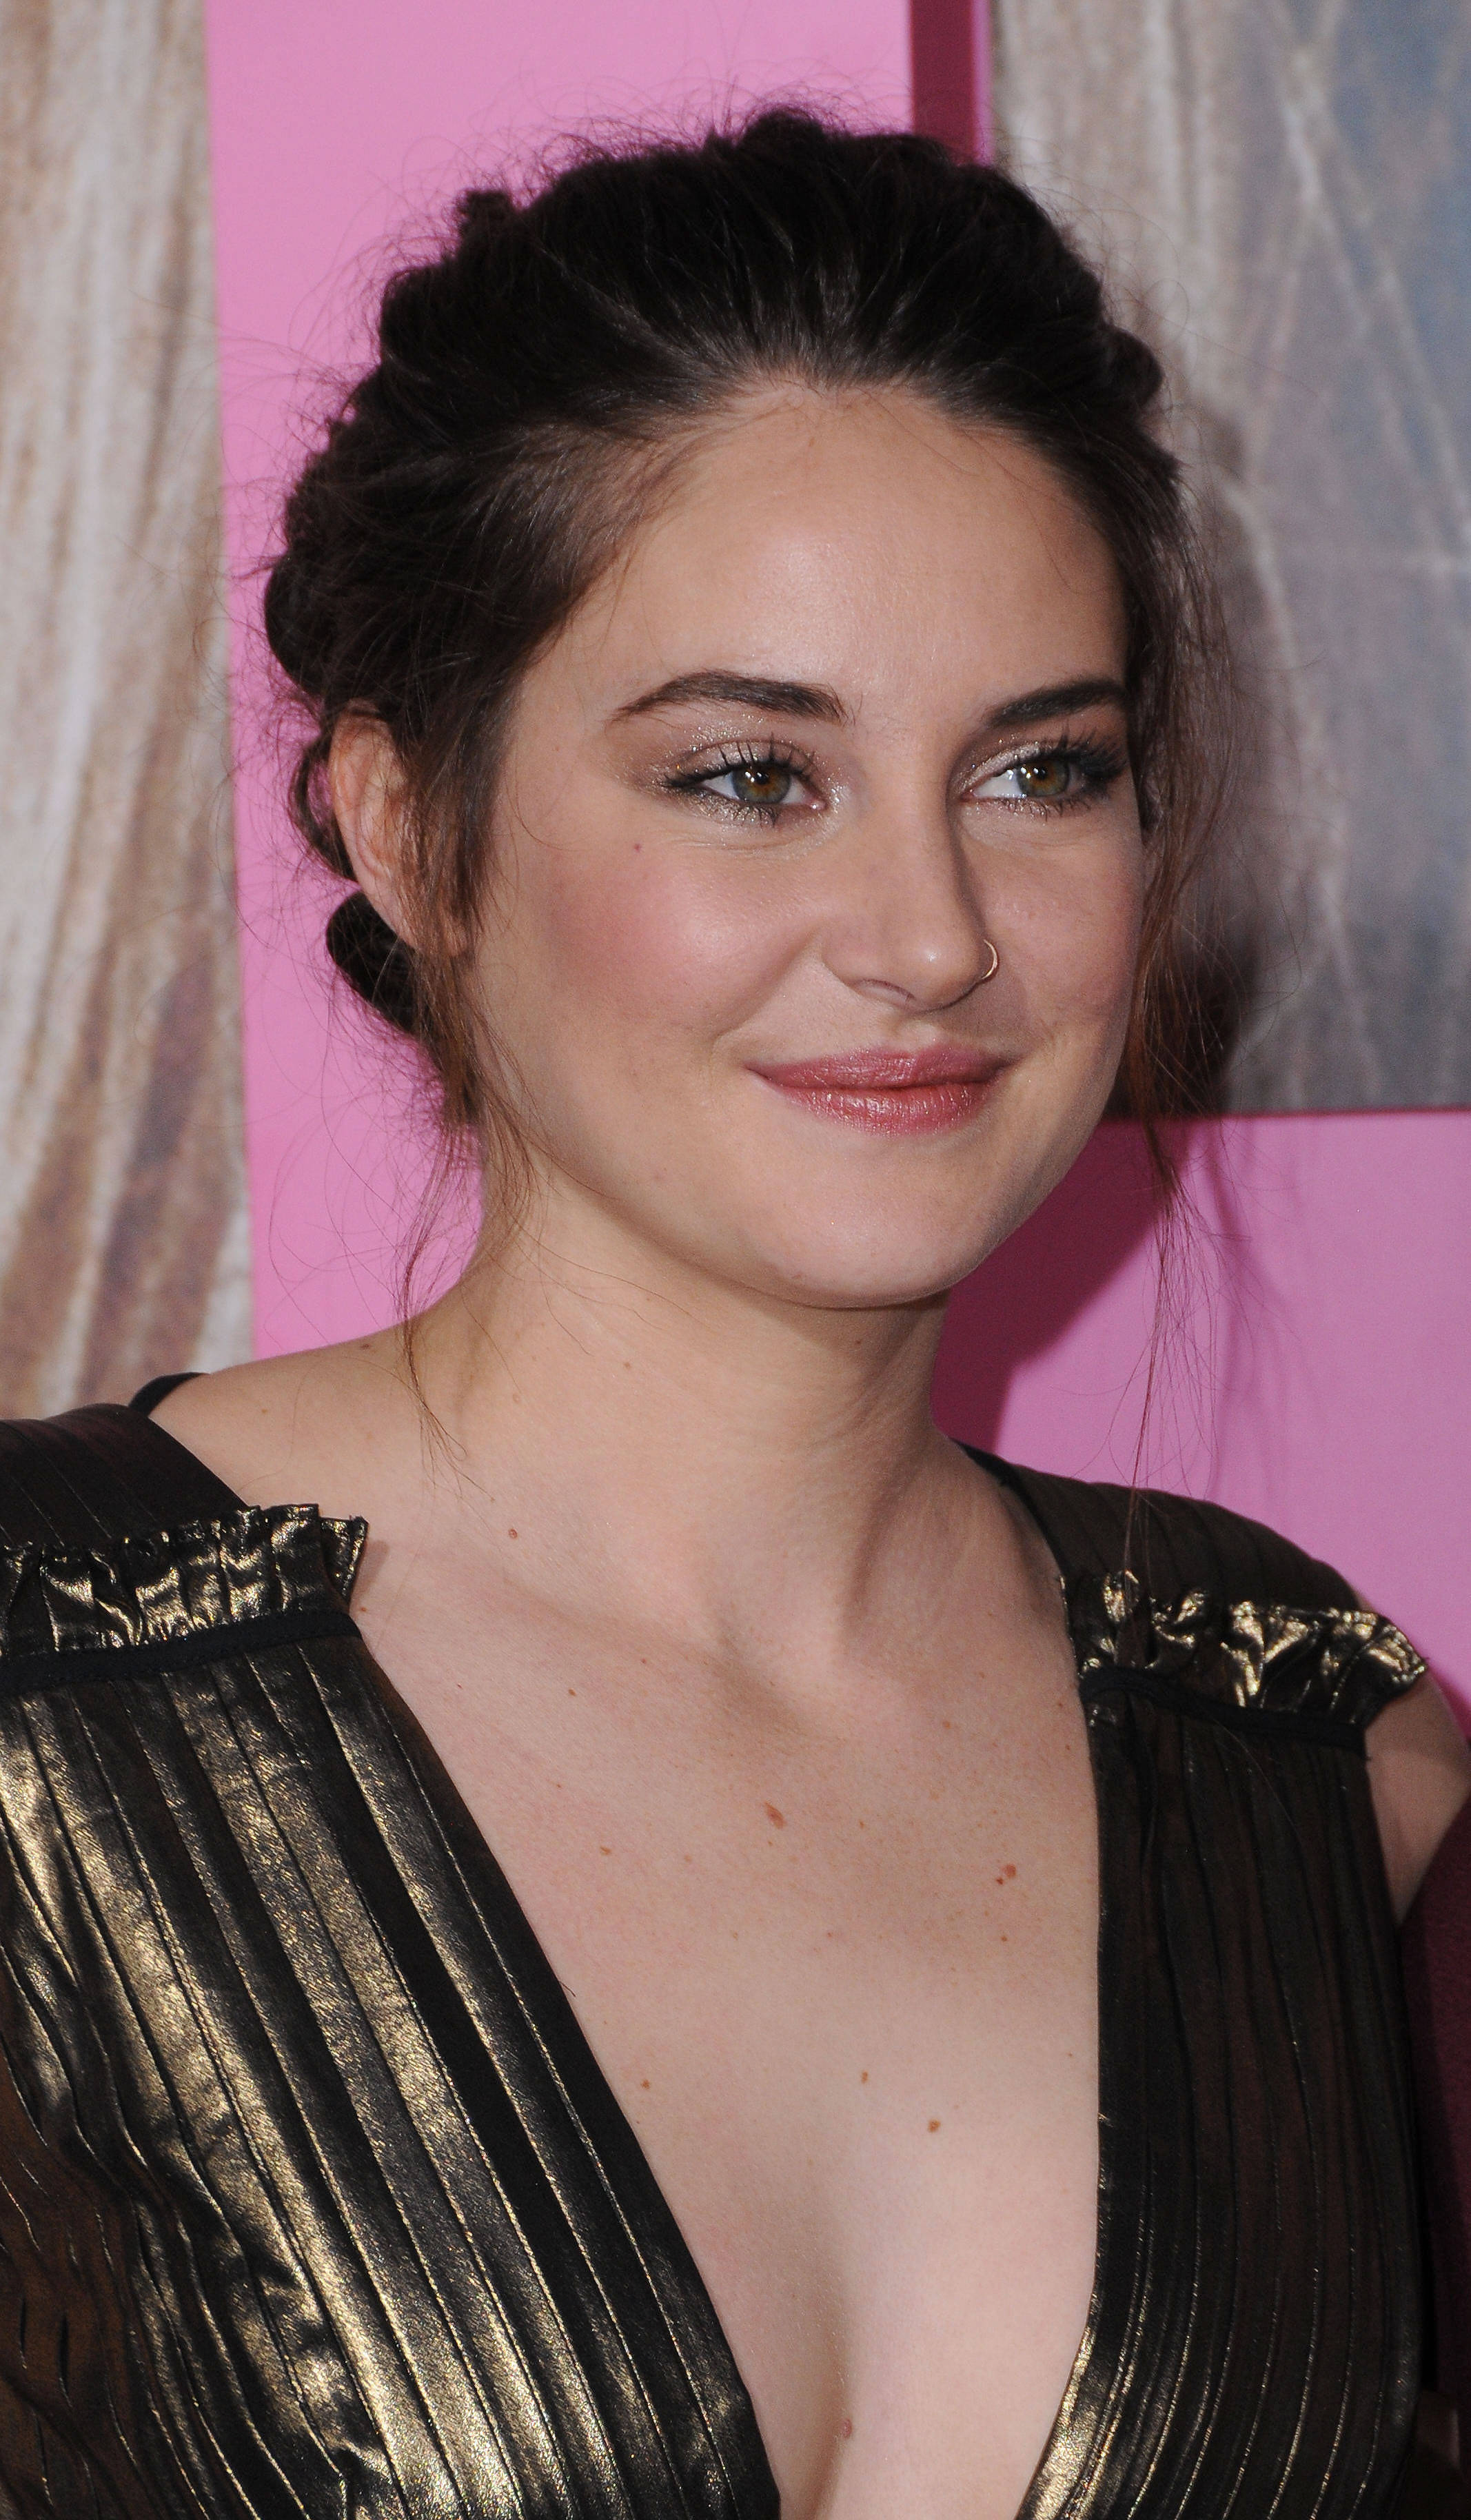 Shailene Woodley – HBO’sBig Little Lies Premiere At TCL Chinese Theater In Los Angeles, CA February 7, 2017